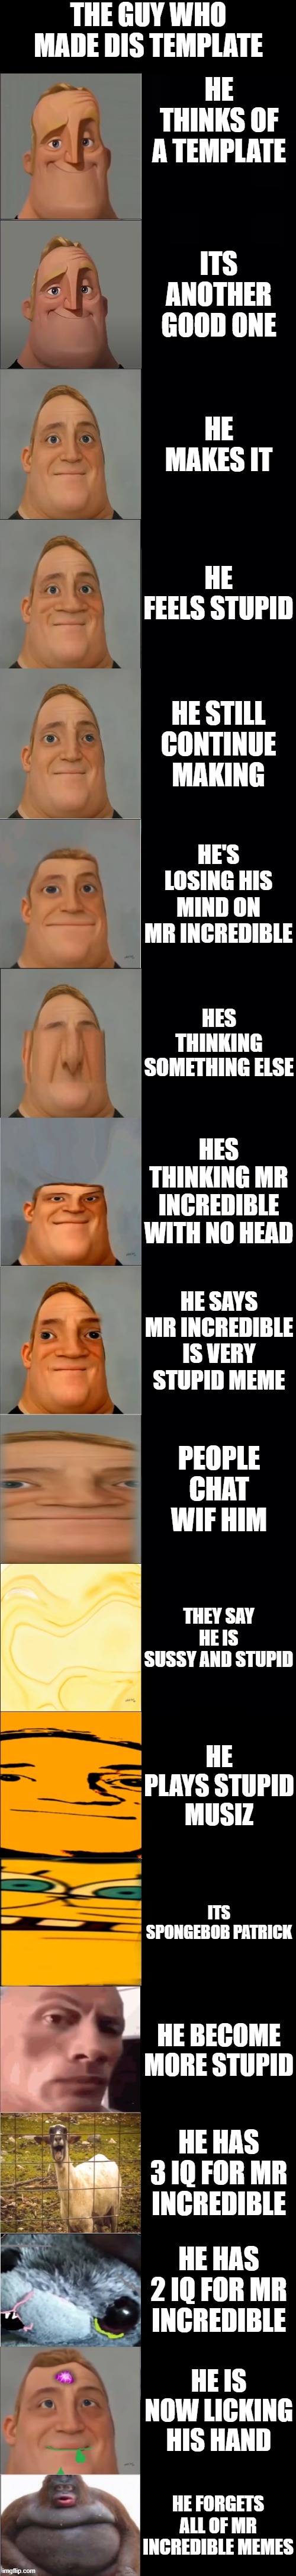 sorry guy who made template! | THE GUY WHO MADE DIS TEMPLATE; HE THINKS OF A TEMPLATE; ITS ANOTHER GOOD ONE; HE MAKES IT; HE FEELS STUPID; HE STILL CONTINUE MAKING; HE'S LOSING HIS MIND ON MR INCREDIBLE; HES THINKING SOMETHING ELSE; HES THINKING MR INCREDIBLE WITH NO HEAD; HE SAYS MR INCREDIBLE IS VERY STUPID MEME; PEOPLE CHAT WIF HIM; THEY SAY HE IS SUSSY AND STUPID; HE PLAYS STUPID MUSIZ; ITS SPONGEBOB PATRICK; HE BECOME MORE STUPID; HE HAS 3 IQ FOR MR INCREDIBLE; HE HAS 2 IQ FOR MR INCREDIBLE; HE IS NOW LICKING HIS HAND; HE FORGETS ALL OF MR INCREDIBLE MEMES | image tagged in mr incredible becoming an idiot 2 | made w/ Imgflip meme maker